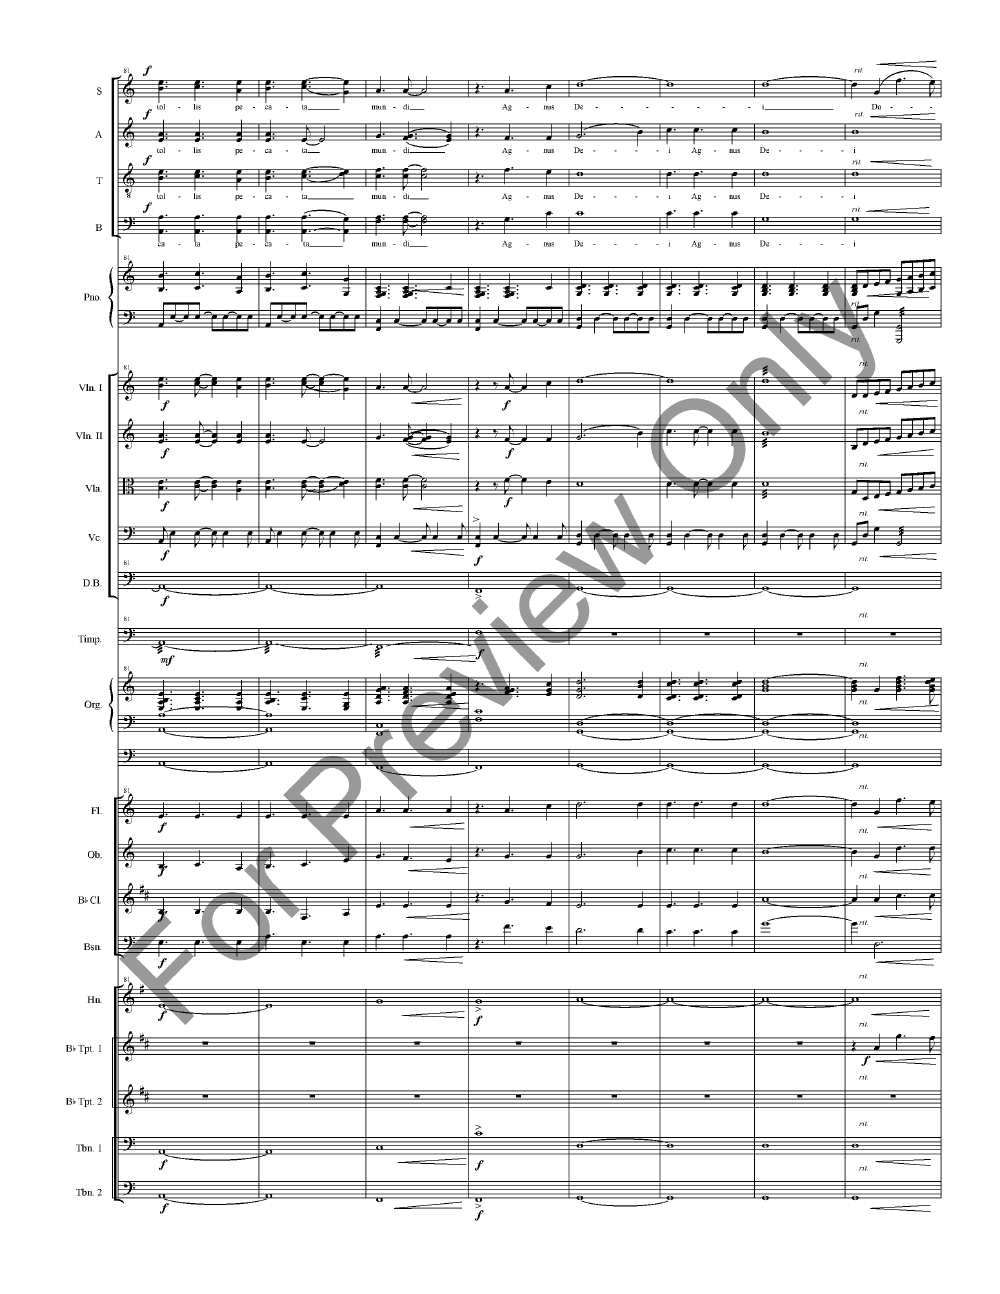 Wedding Mass Full Score with Orchestra Parts P.O.D.